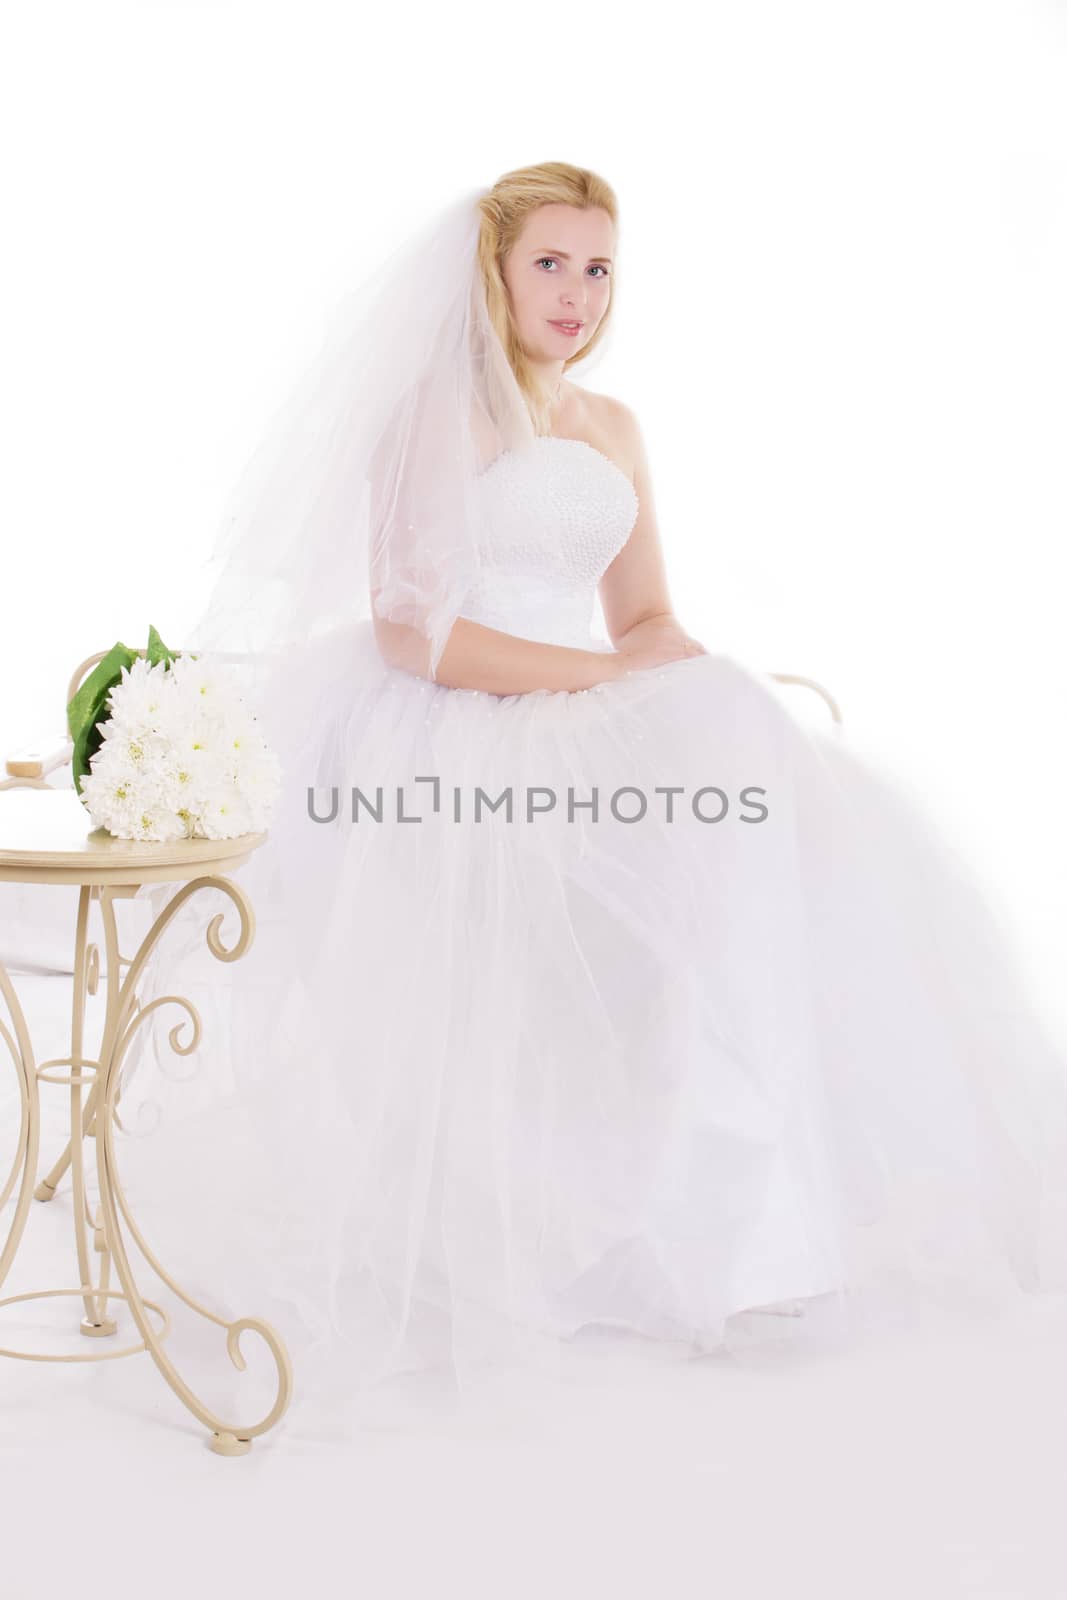 Blonde bride sitting with bouquet isolated on white